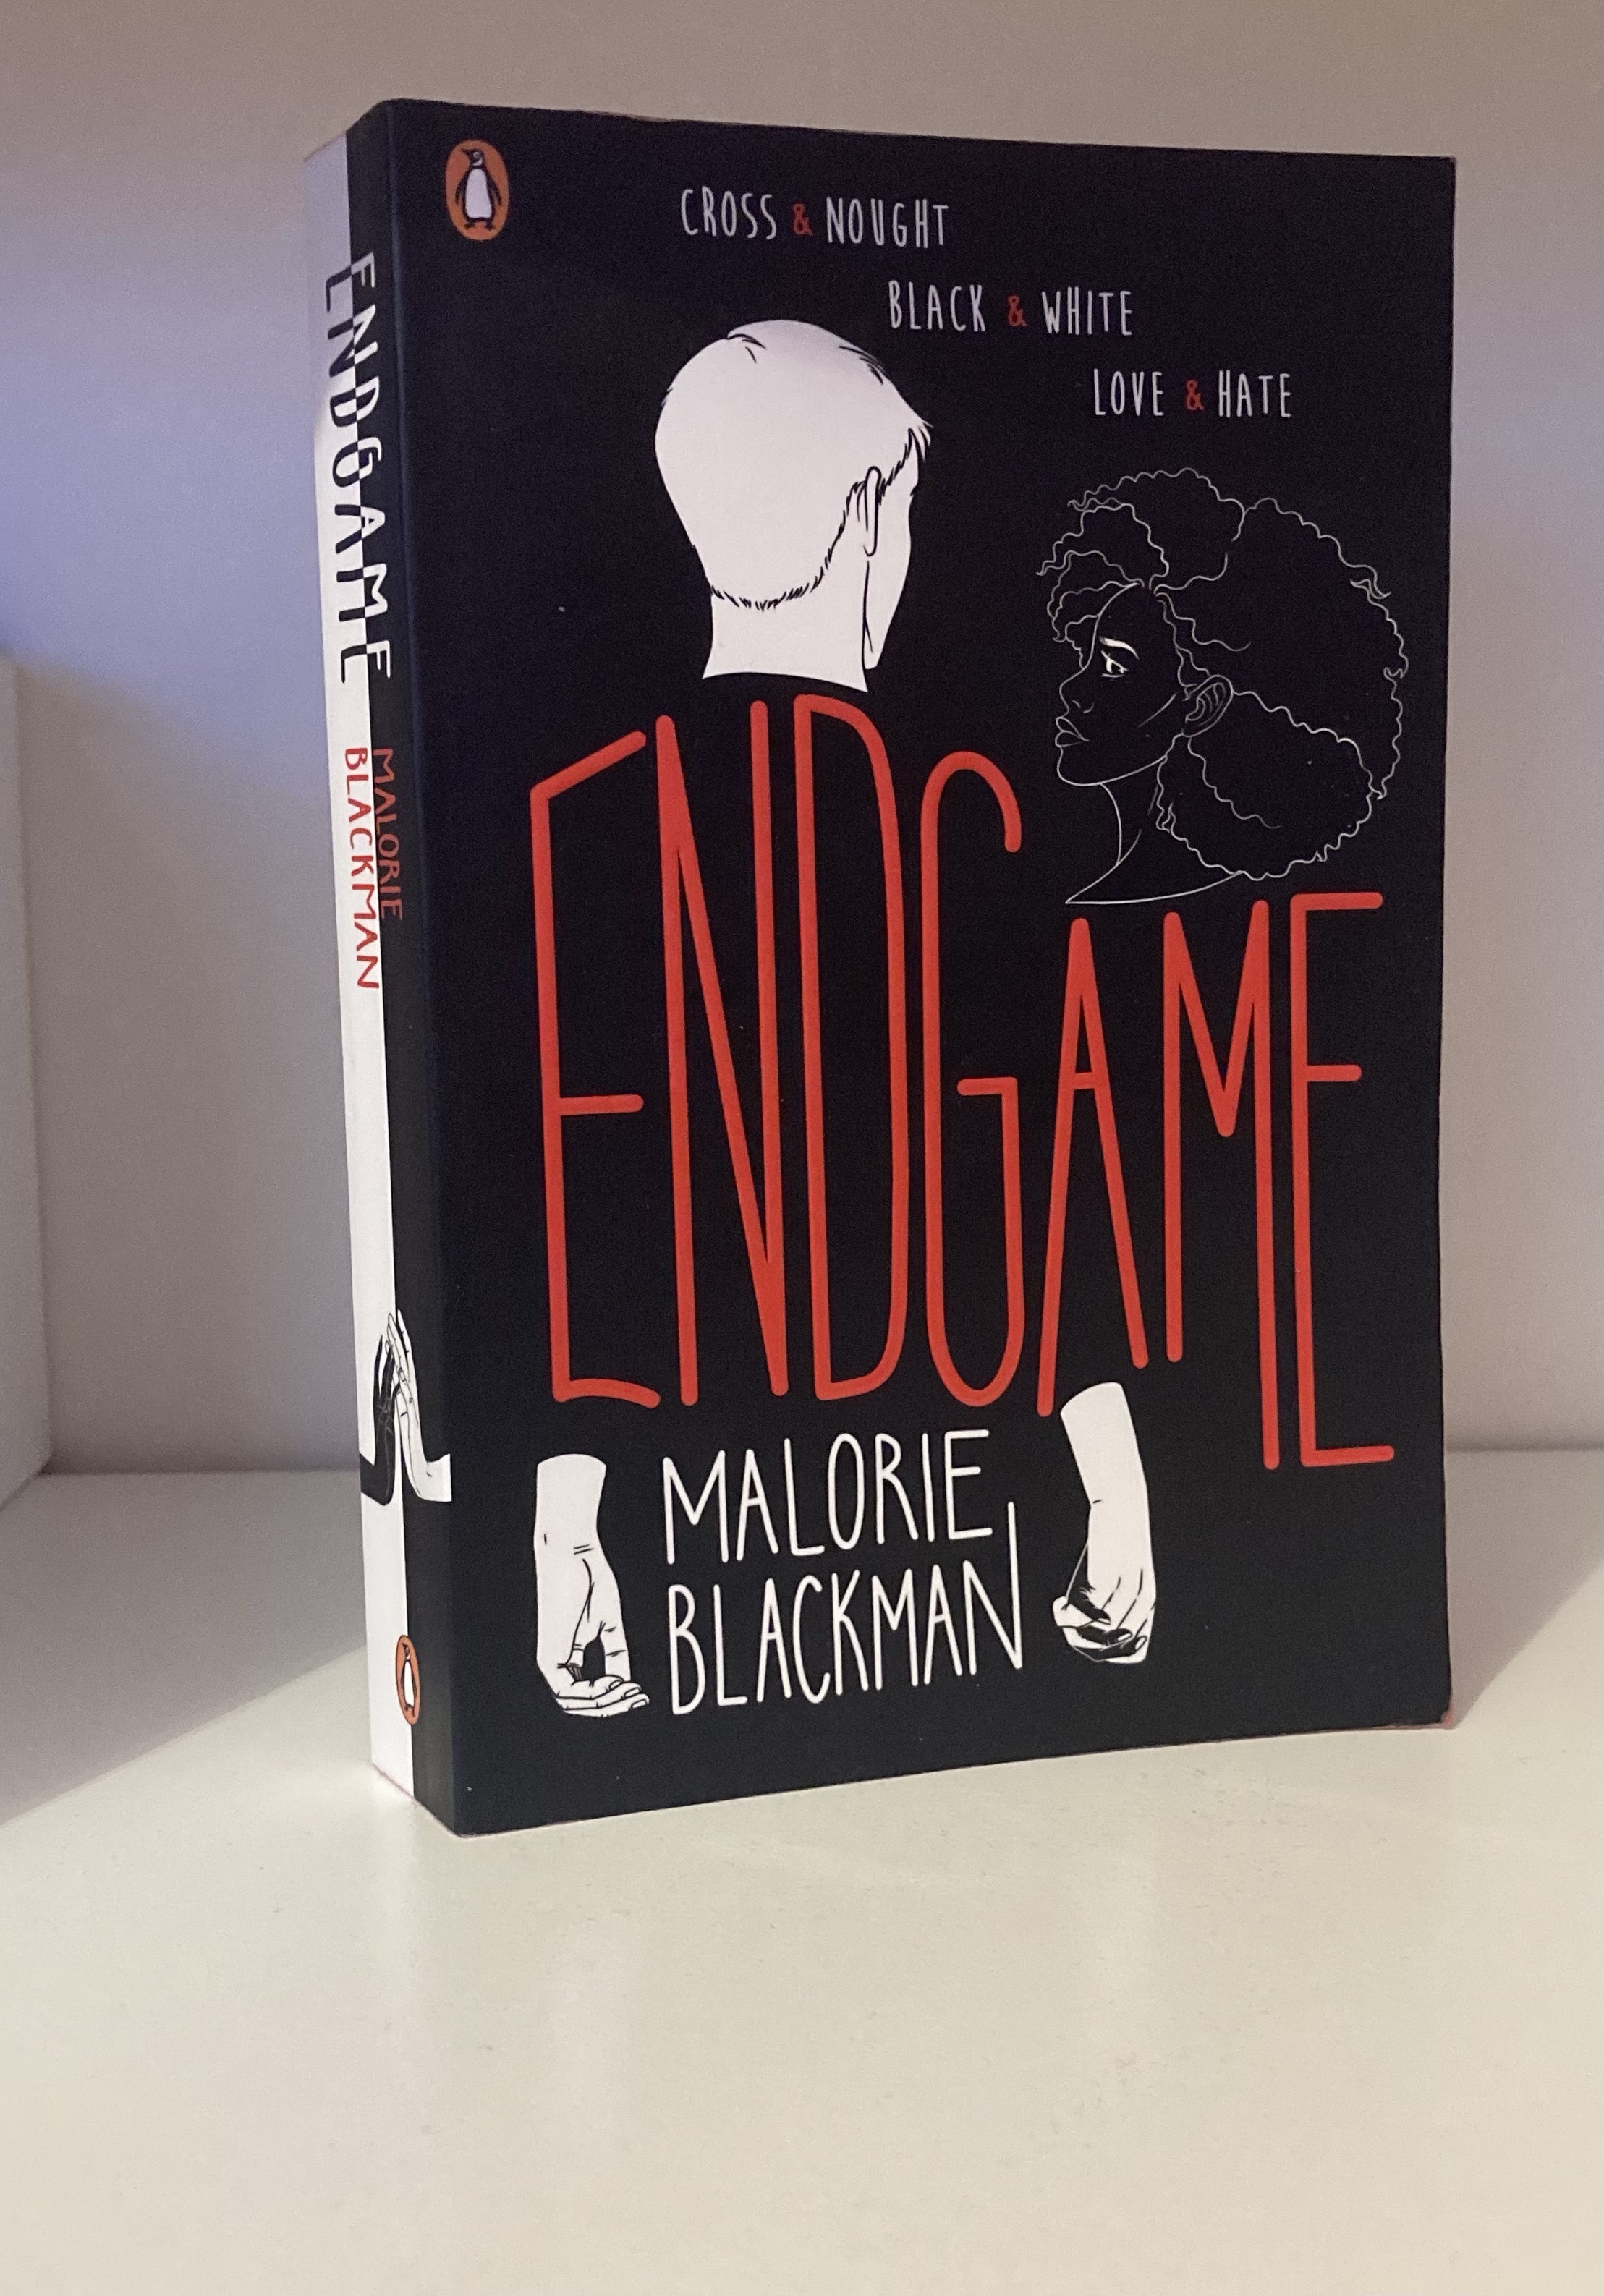 The cover of Endgame by Malorie Blackman